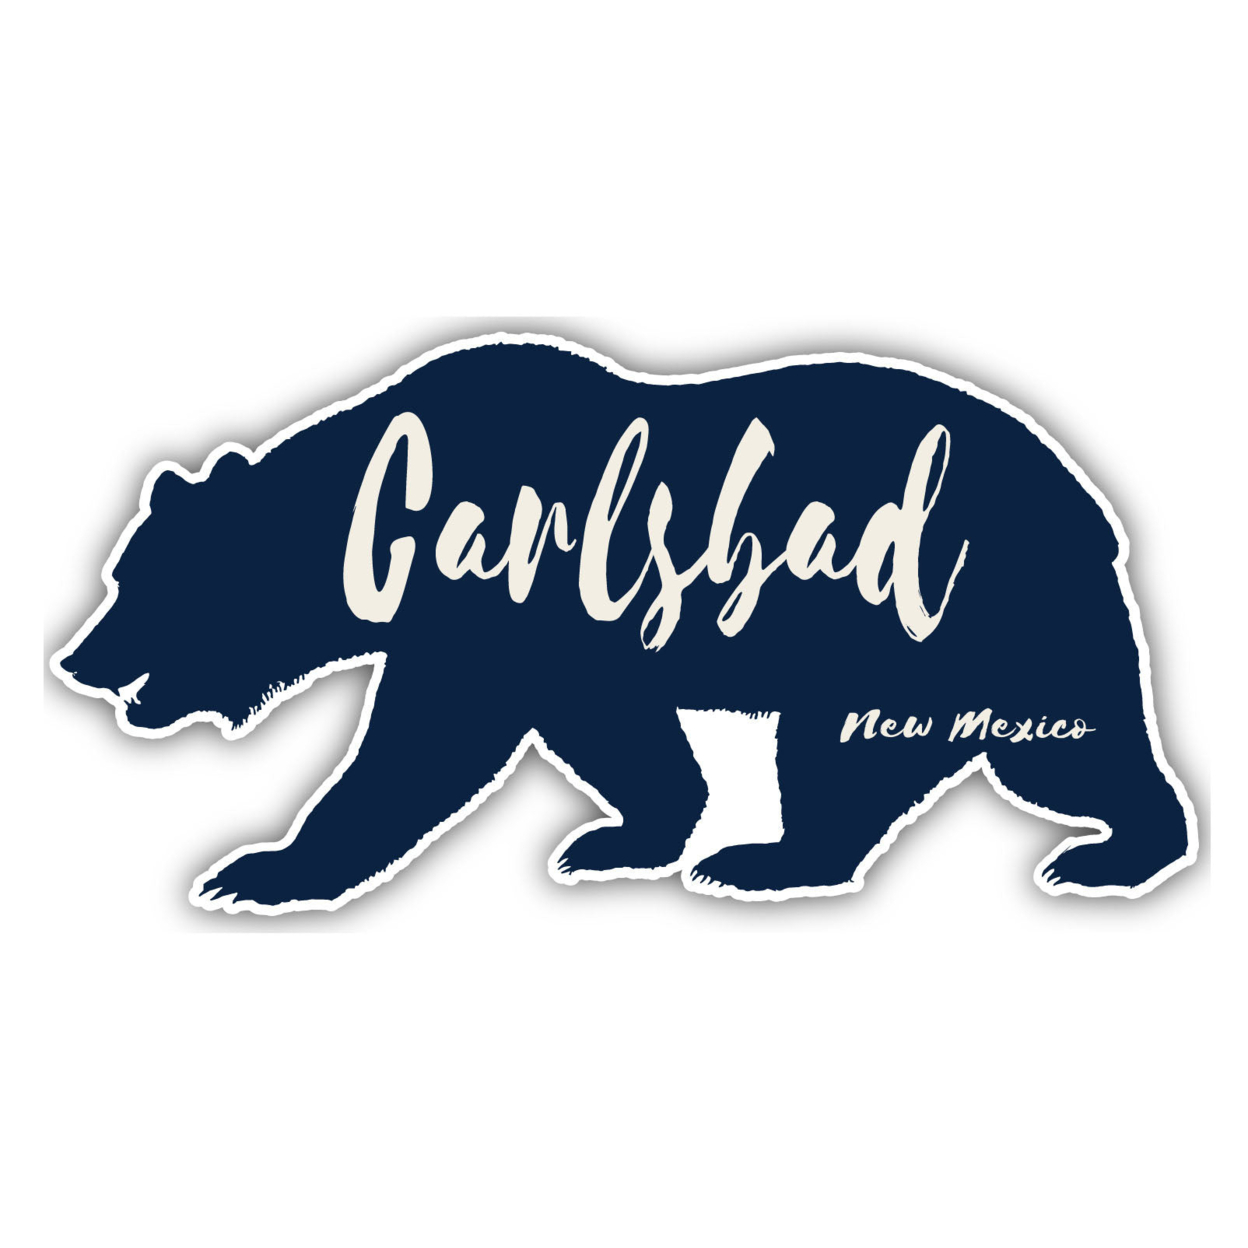 Carlsbad New Mexico Souvenir Decorative Stickers (Choose Theme And Size) - 4-Pack, 12-Inch, Bear